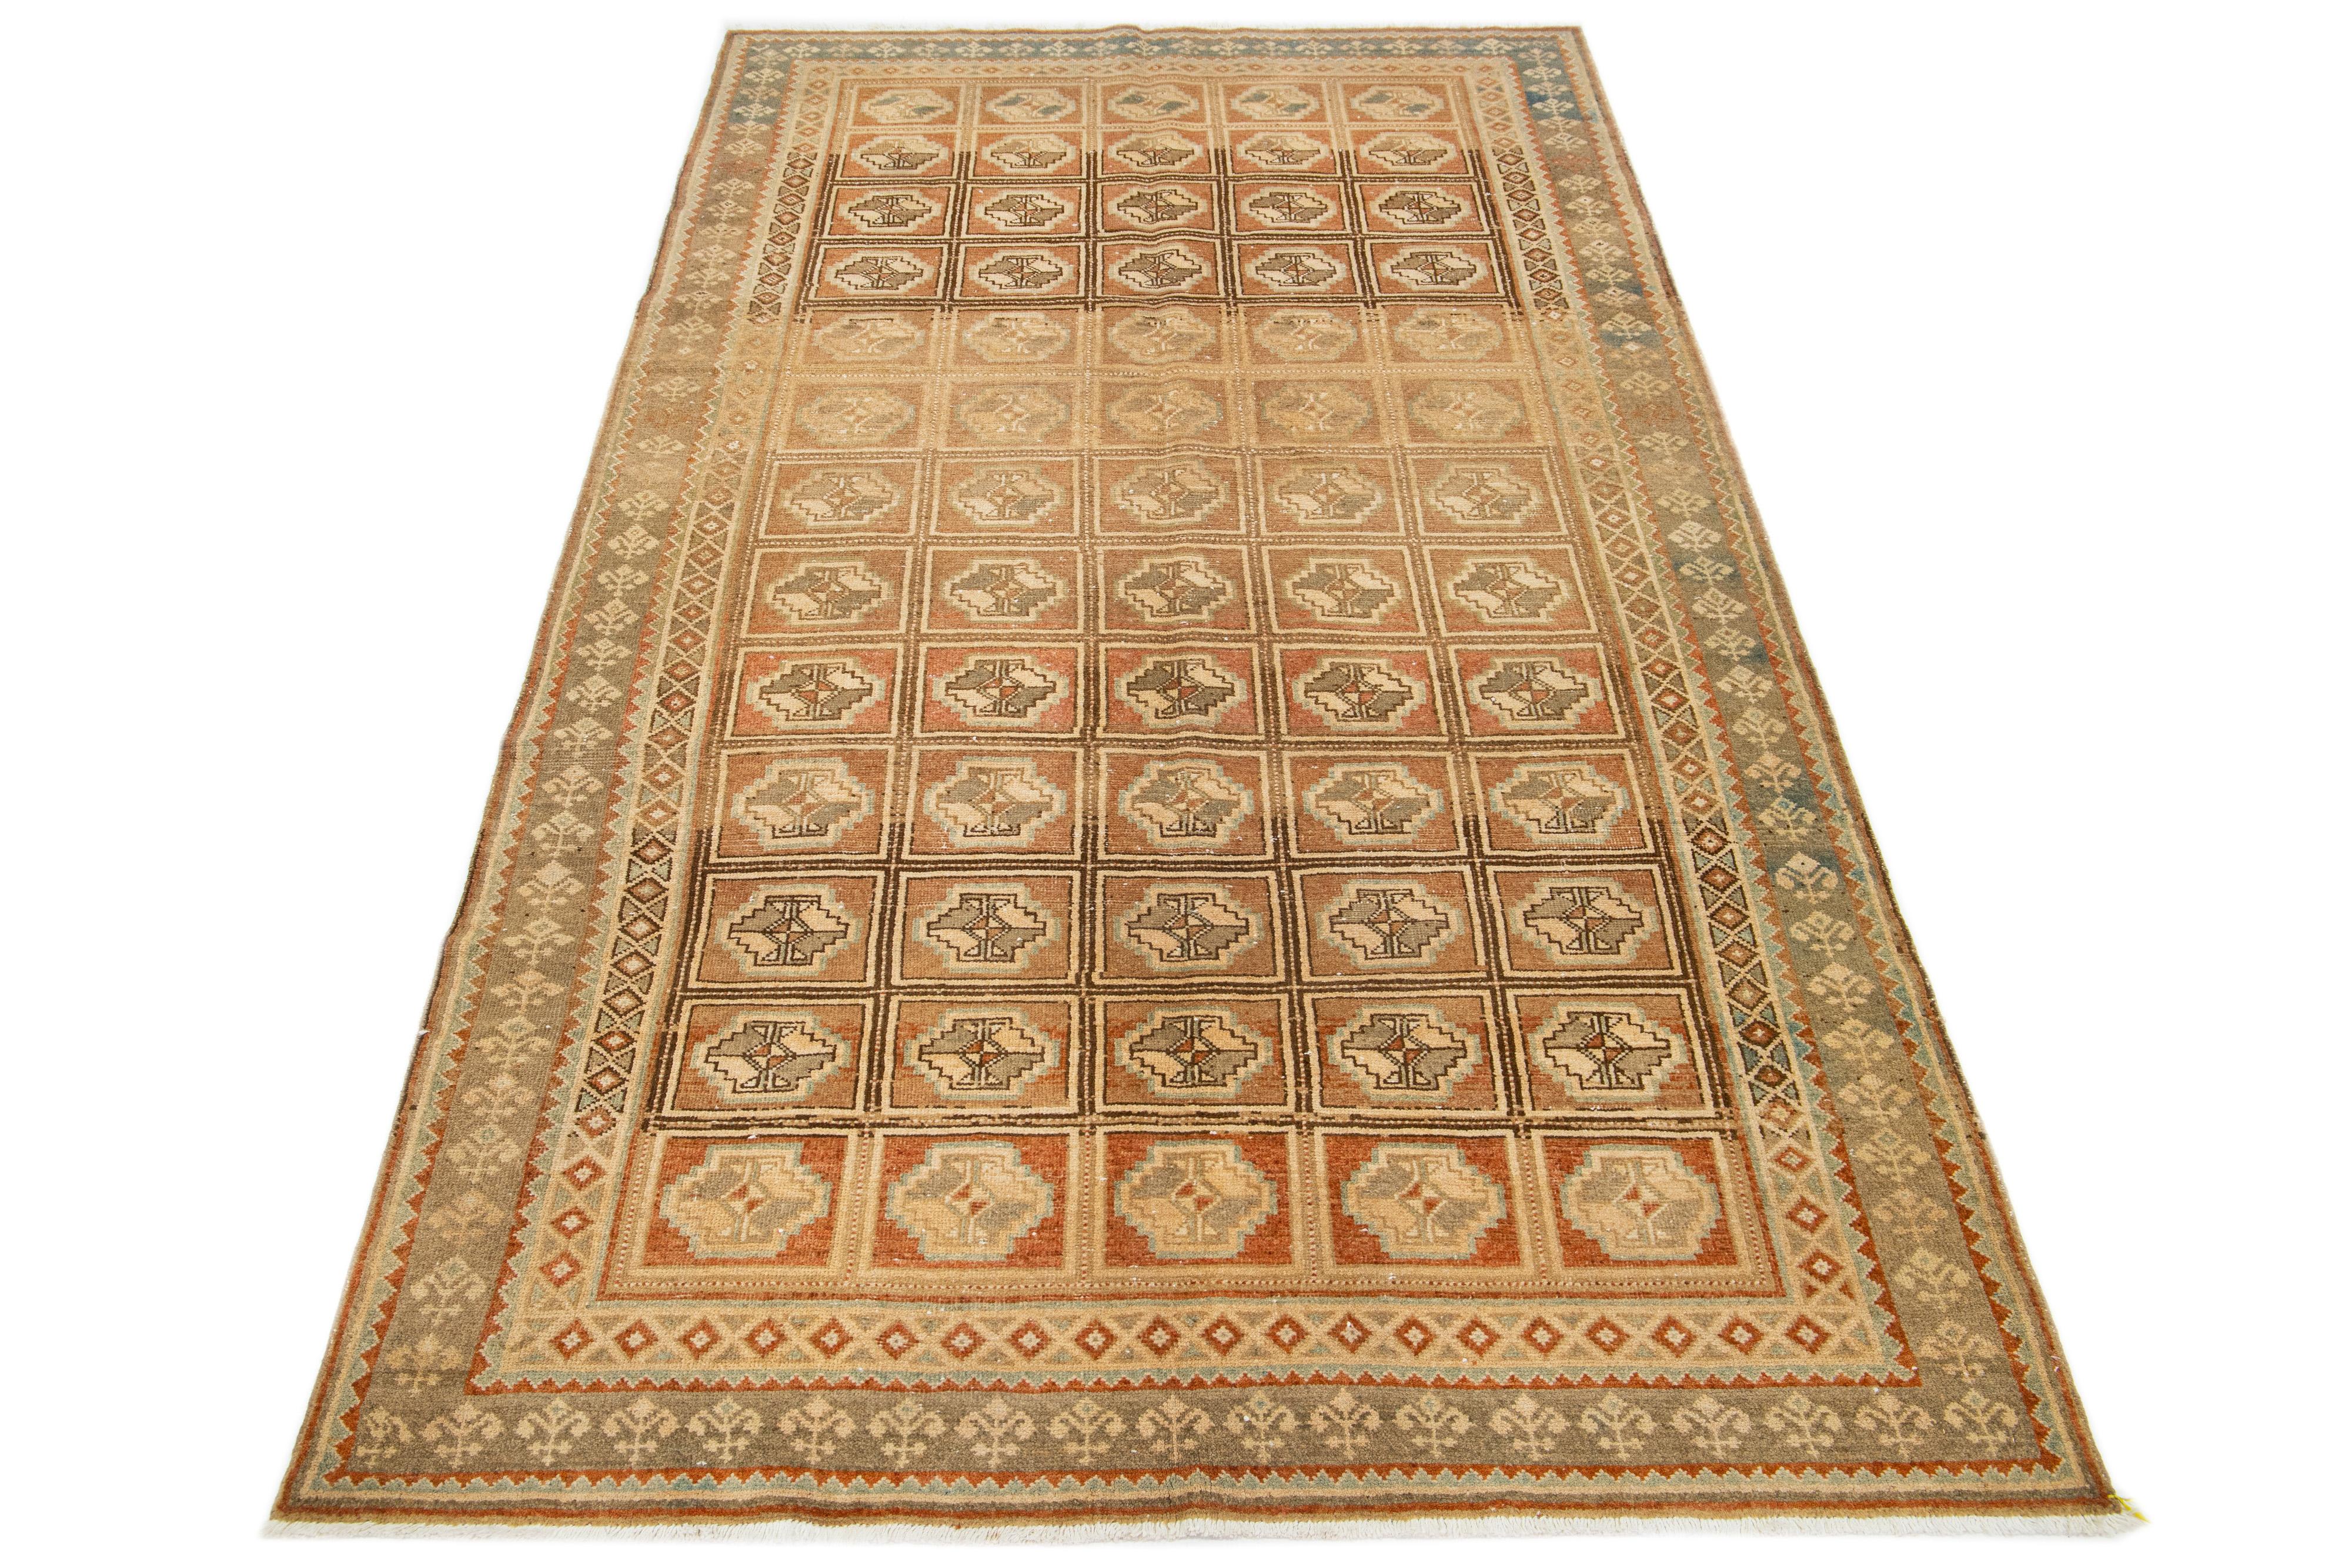 Beautiful vintage Persian hand-knotted wool rug with a tan color field. This piece has a designed frame with terracotta, blue, and beige accents in a gorgeous all-over geometric pattern.

This rug measures 5'3